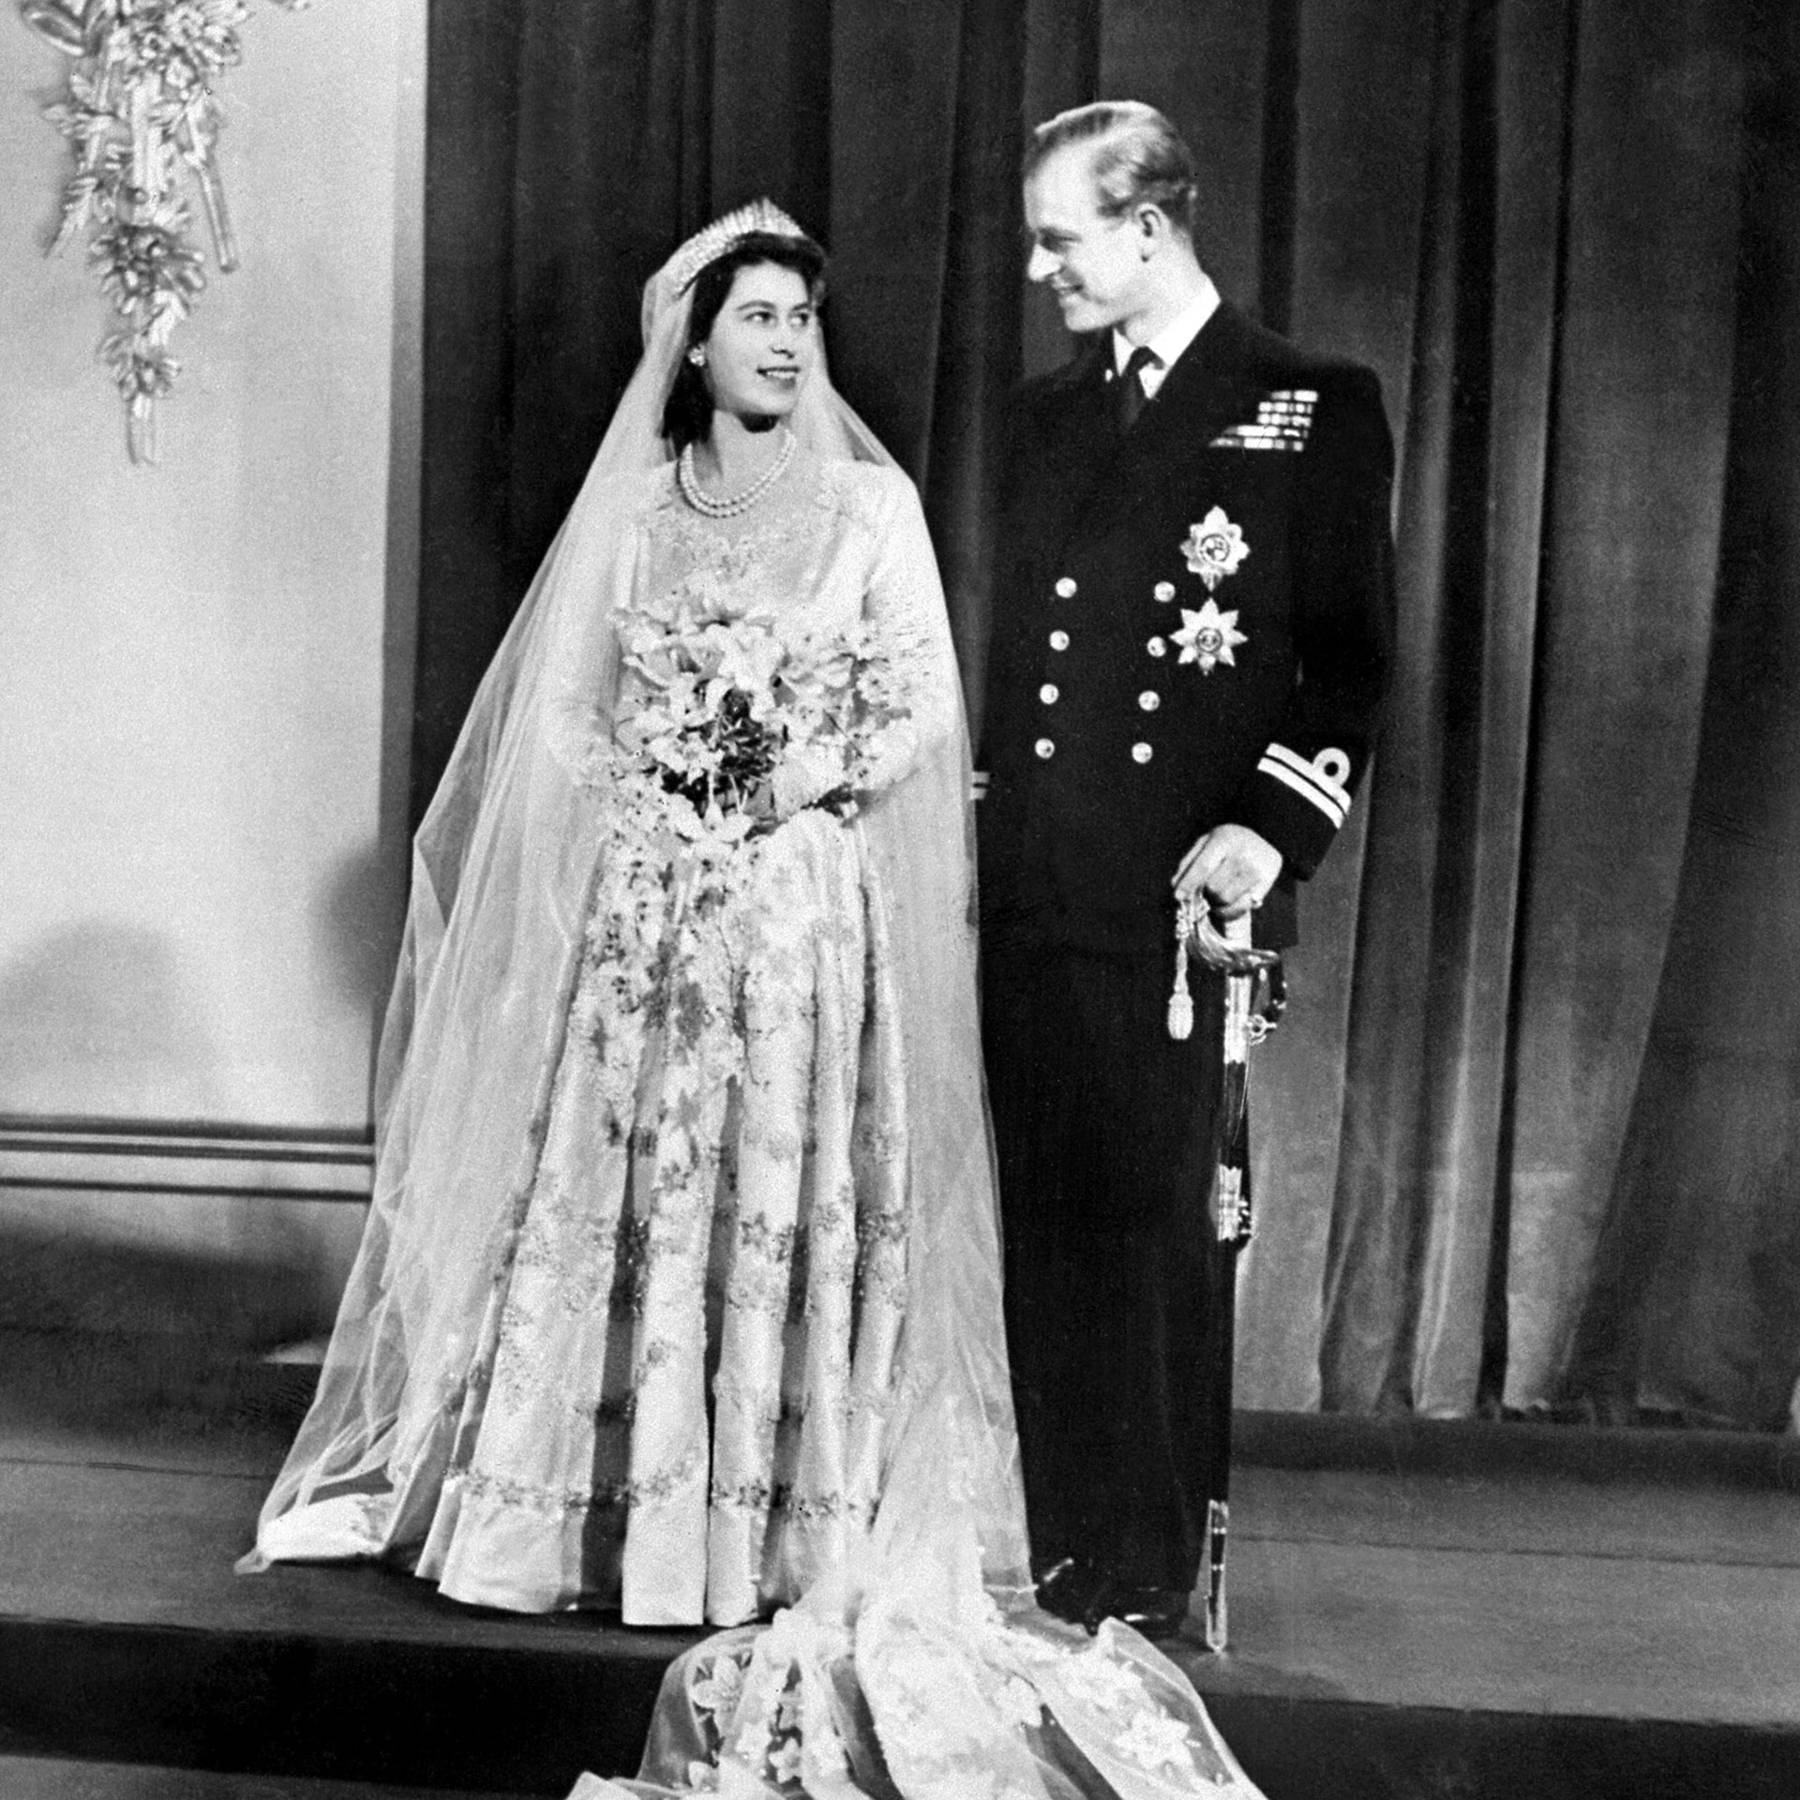 The Queen S Wedding Dress Was Created Using Wartime Ration Coupons Tatler